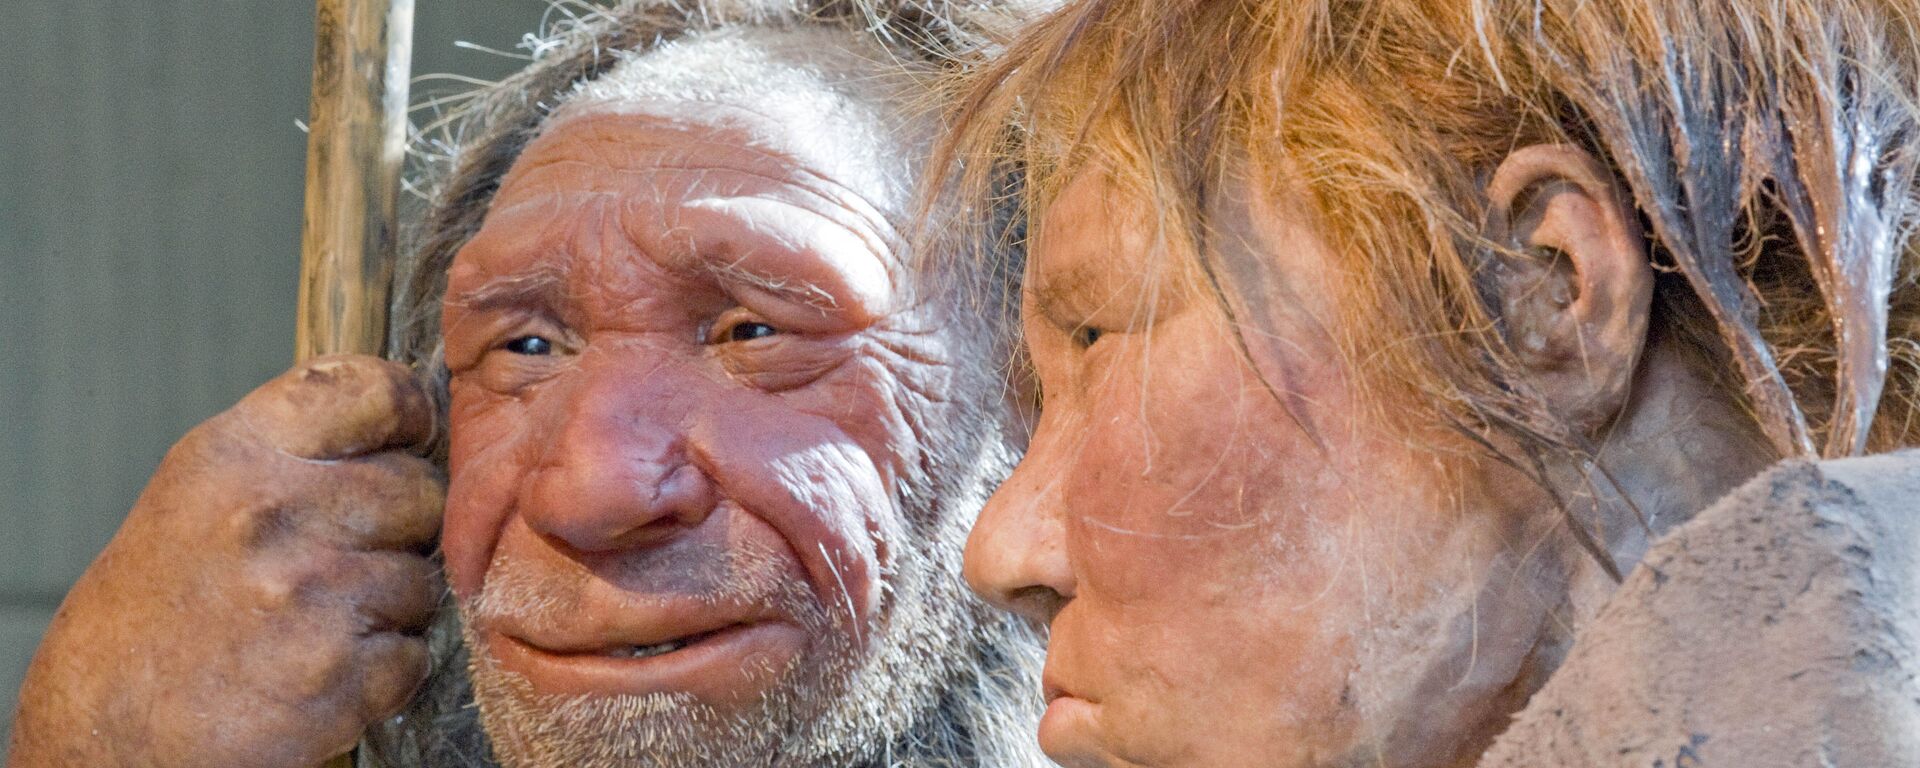 The prehistoric Neanderthal man N, left, is visited for the first time by another reconstruction of a homo neanderthalensis called Wilma, right, at the Neanderthal museum in Mettmann, Germany, Friday, March 20, 2009 - Sputnik International, 1920, 20.10.2022